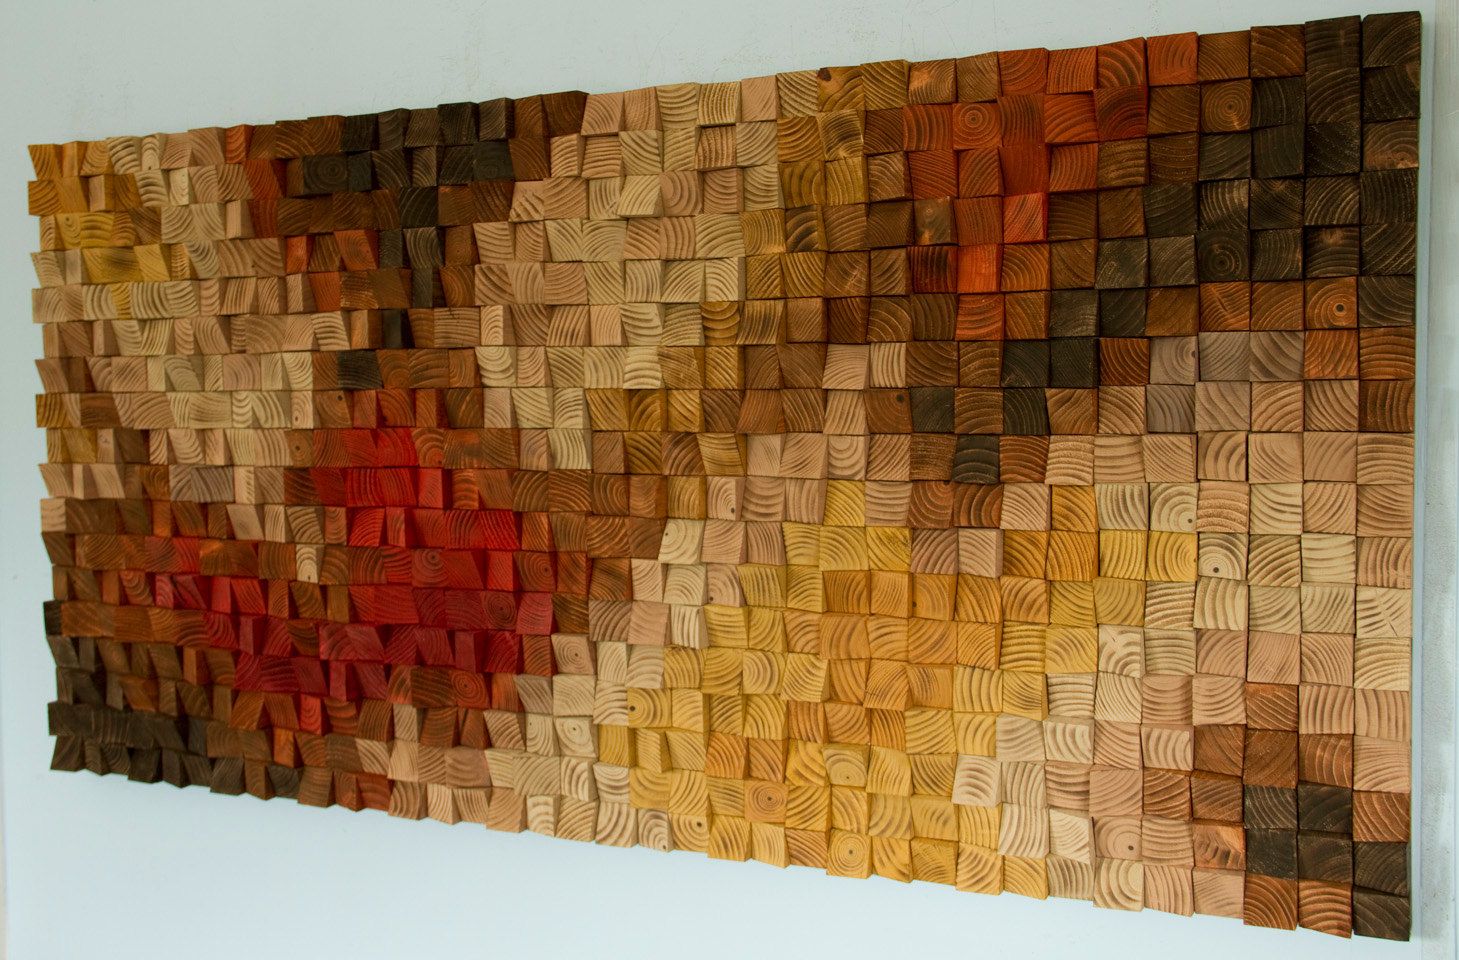 Large Rustic Wood Wall Art, Wood Wall Sculpture, Abstract Within Most Recent Abstract Wood Wall Art (View 7 of 20)